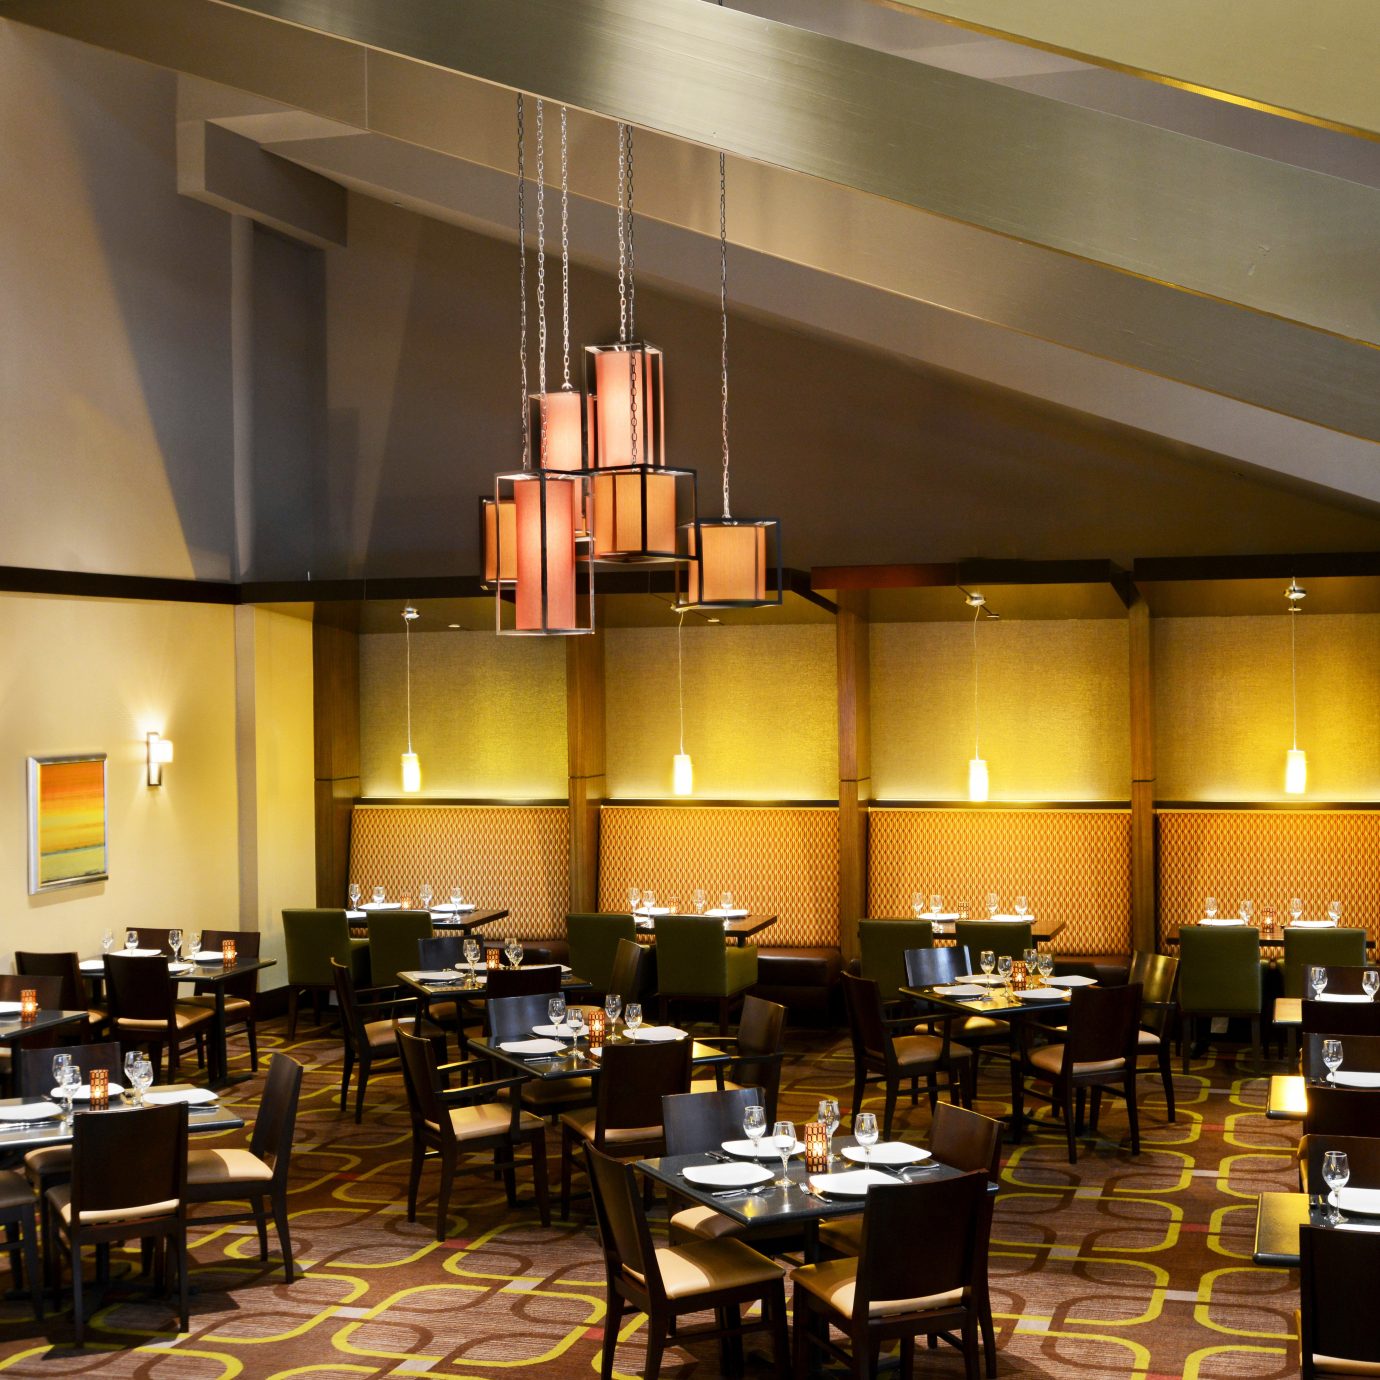 Dining Drink Eat function hall restaurant auditorium conference hall convention center cafeteria café Lobby ballroom